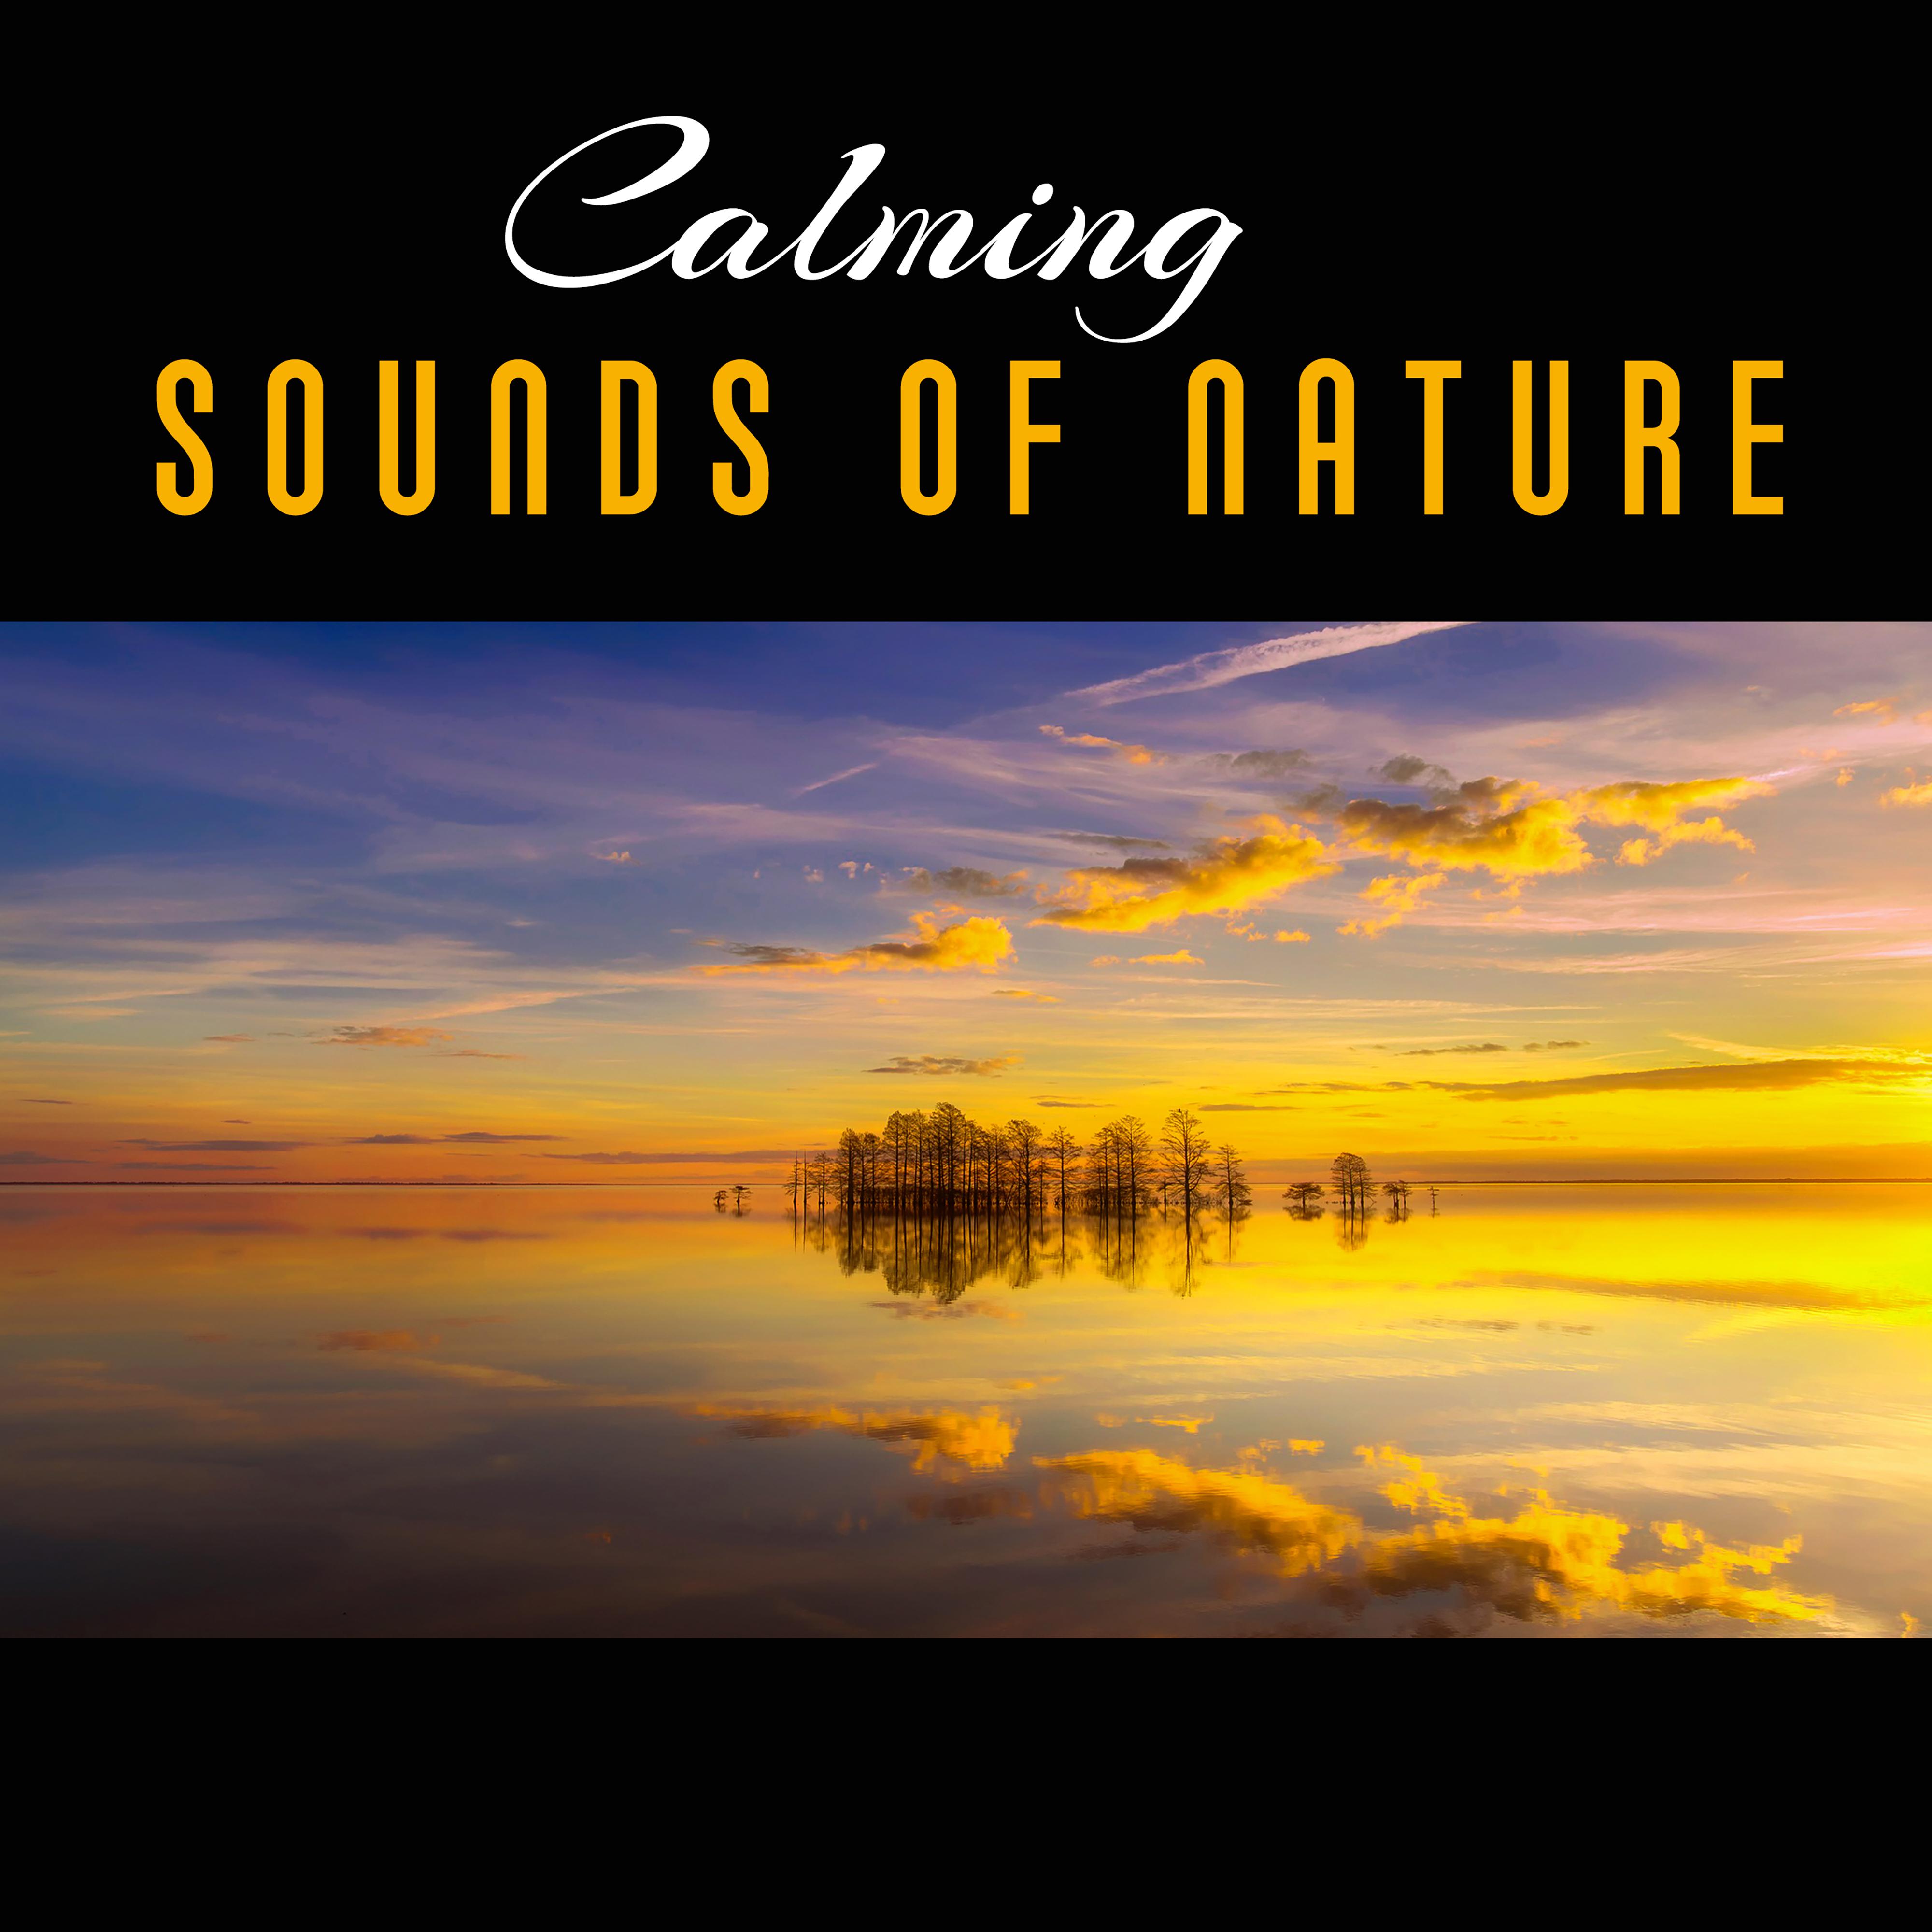 Calming Sounds of Nature – Soft Sounds to Relax, Nature Rest, New Age Music, Spa Massage, Inner Calmness